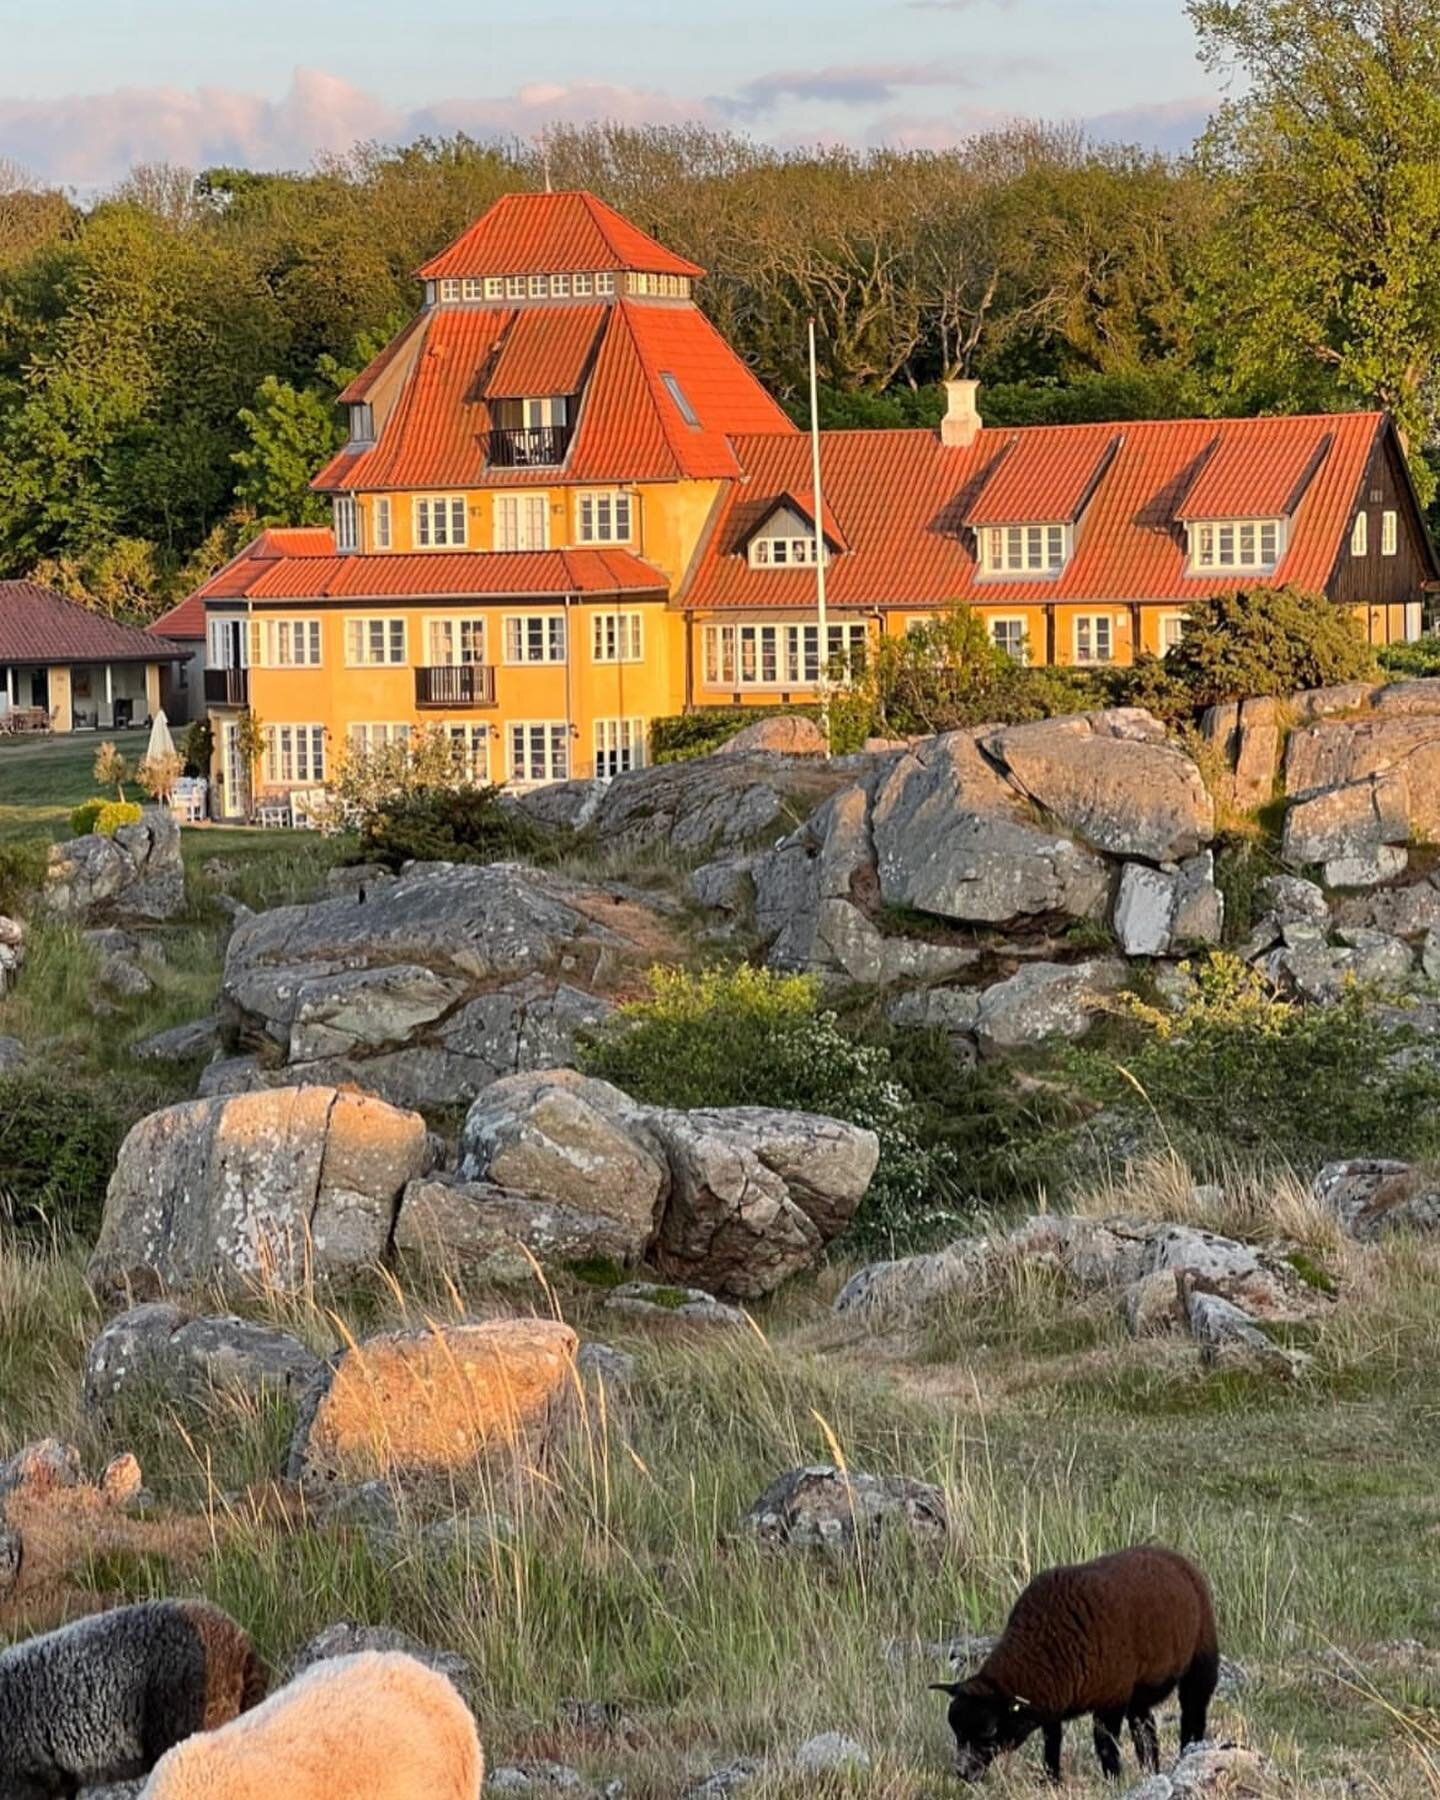 I had the opportunity to help furnish and decorate the iconic @stammershallebadehotel beach hotel on Bornholm. The work was a lot of fun. It was an honour to style the decor and help refurbish the newly renovated hotel by REFORM Arkitektur. 

Some be